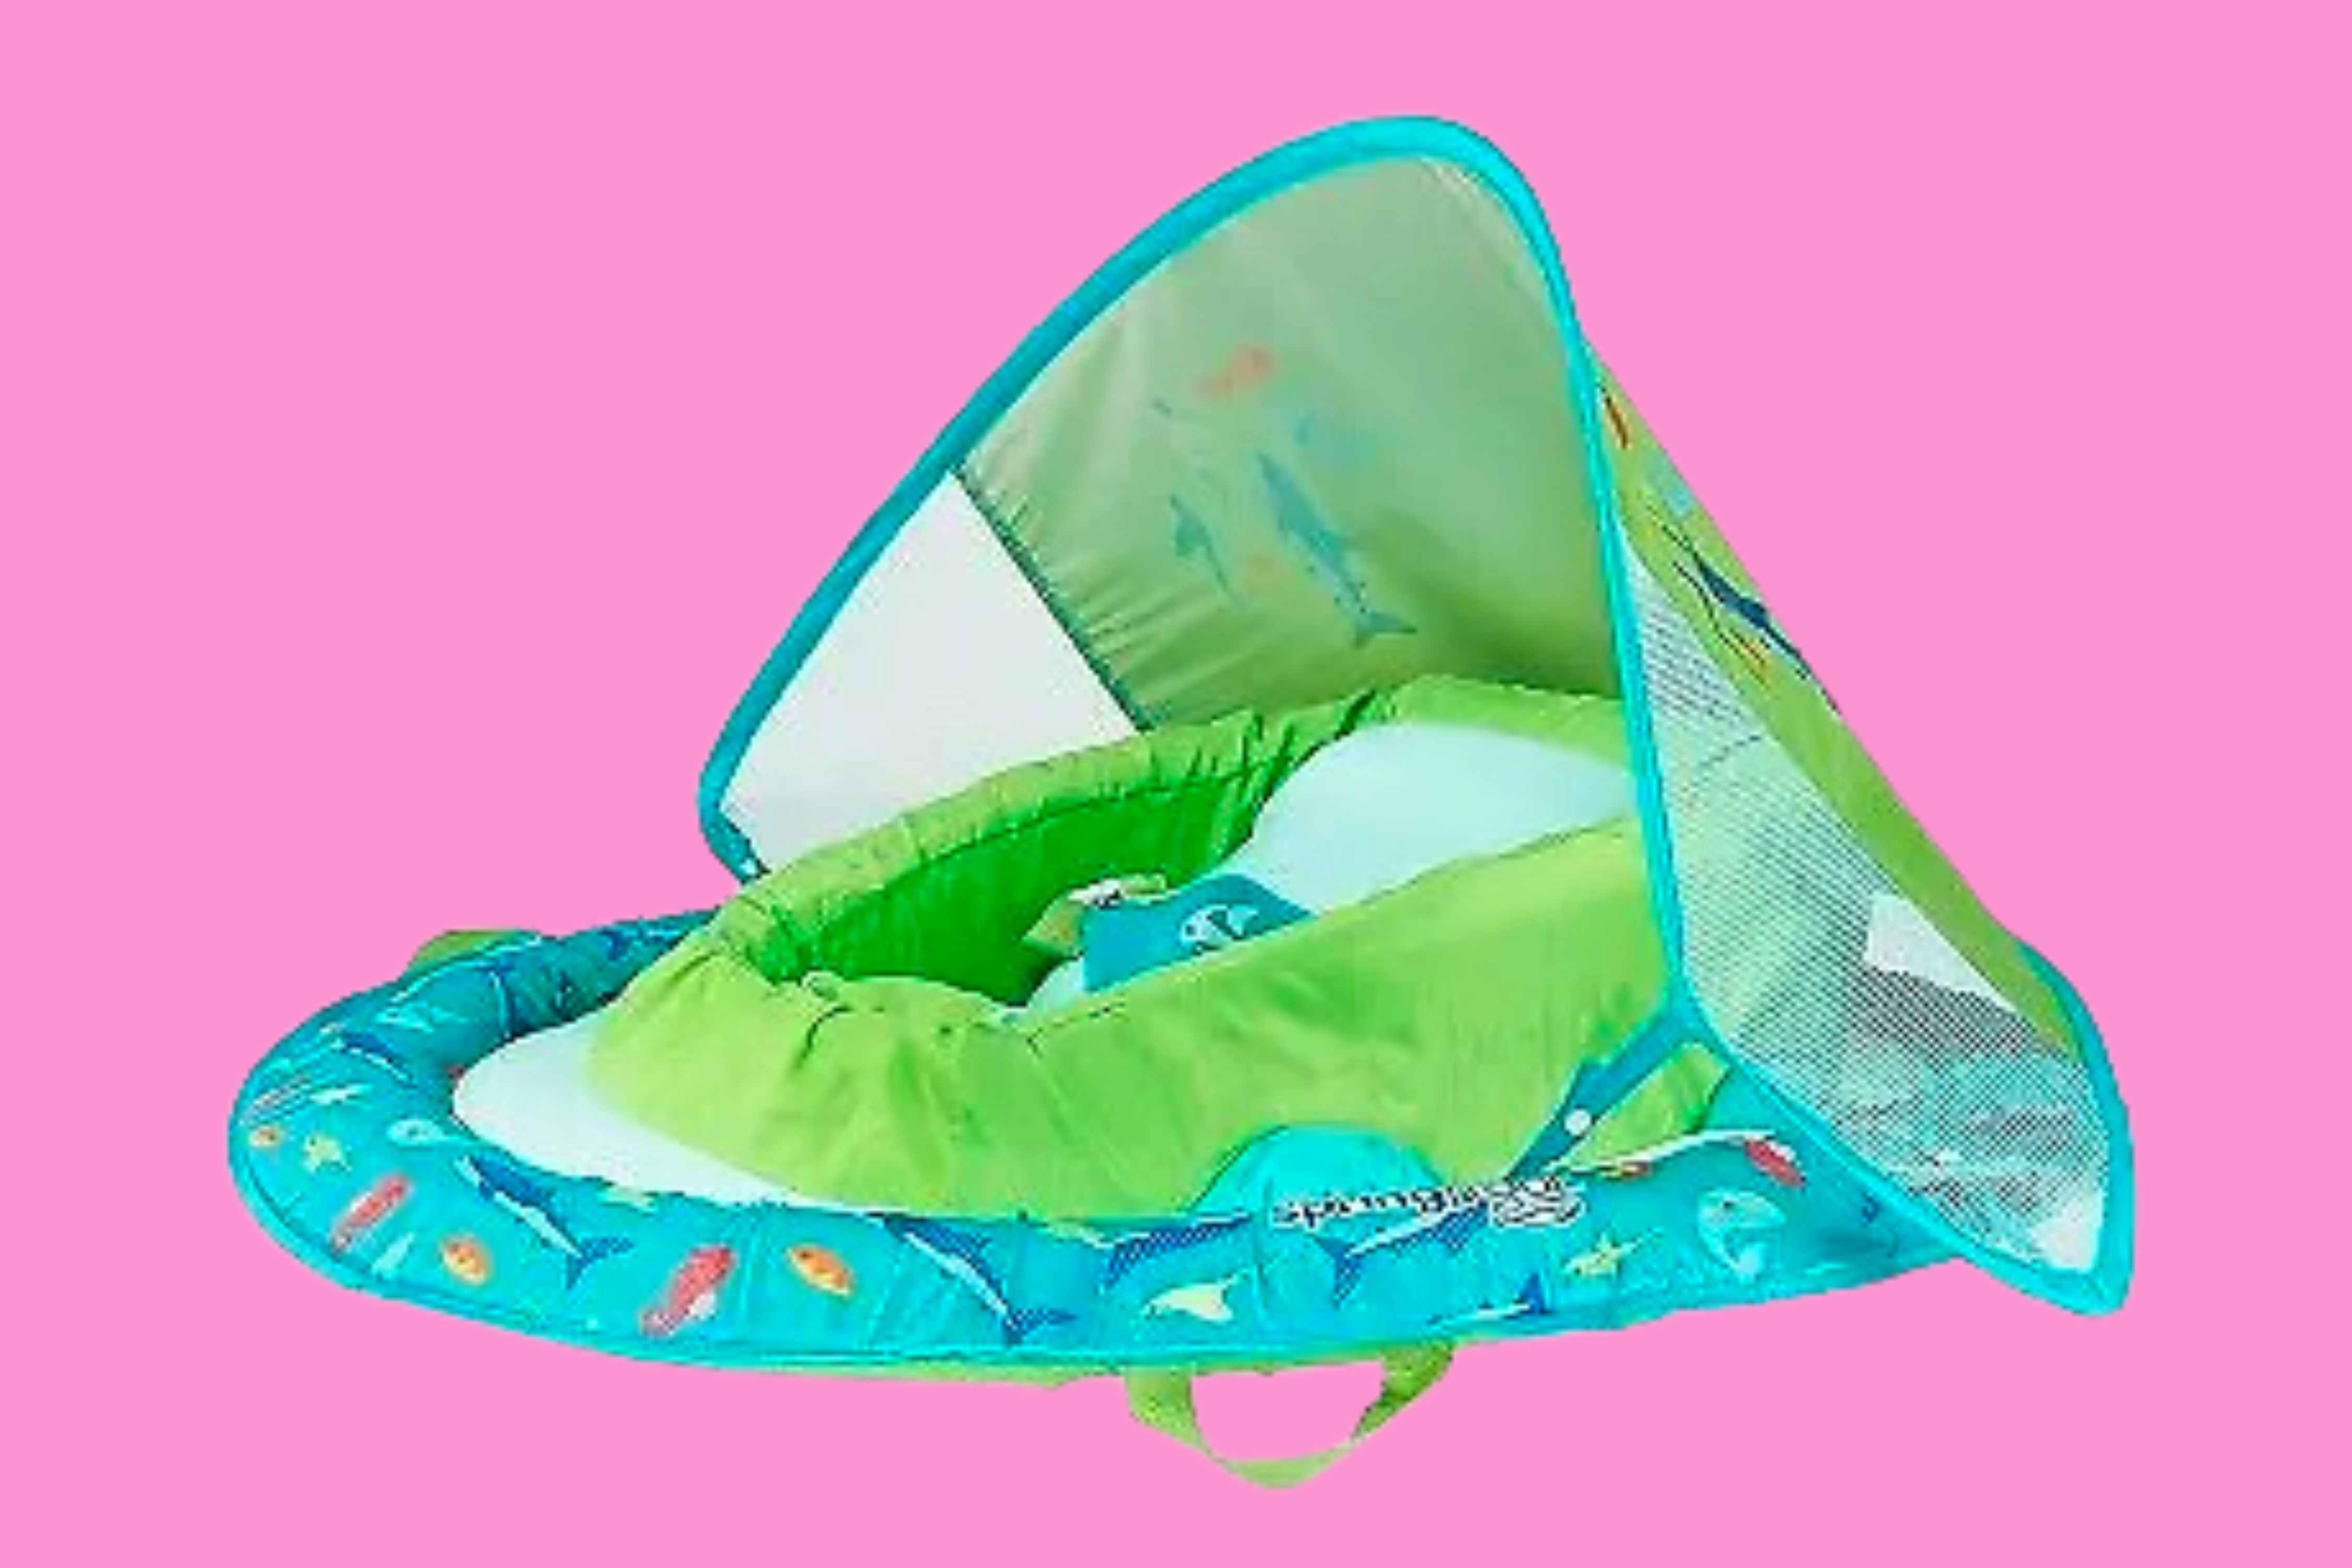 Swimways Infant Pool Float, Only $13 Shipped at eBay